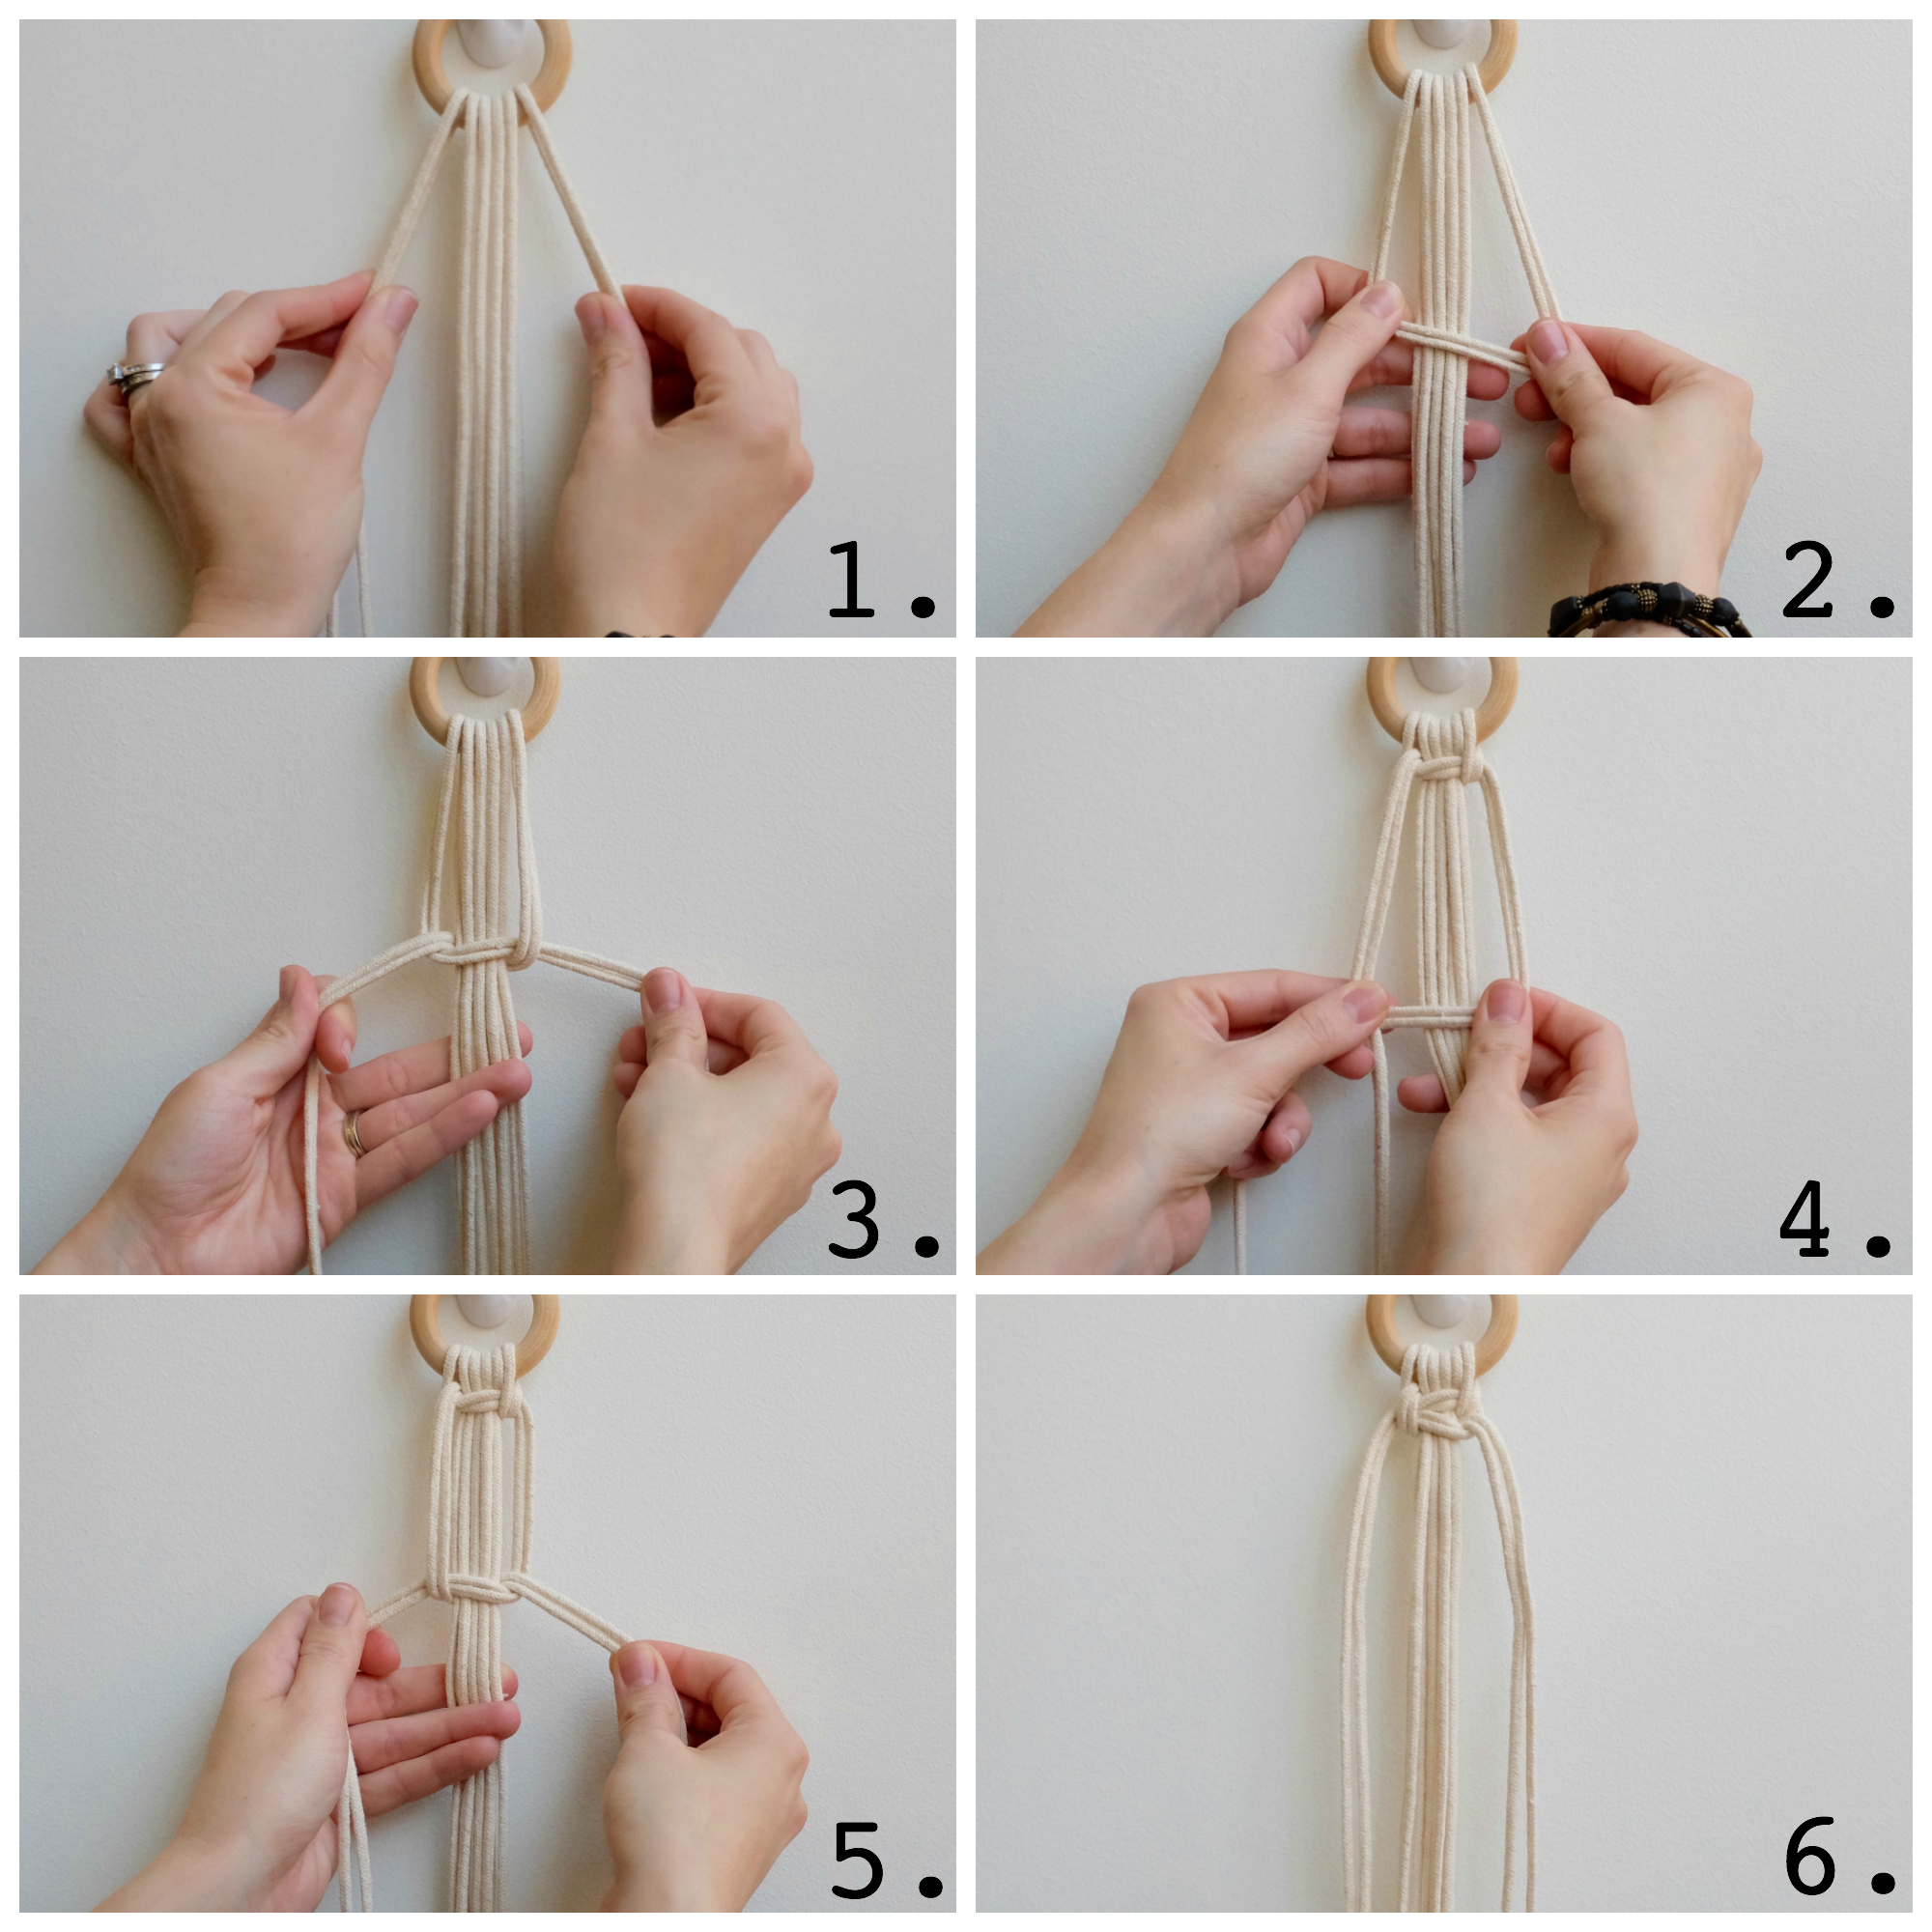 Learn How to Make Macrame Knots and Projects for Free